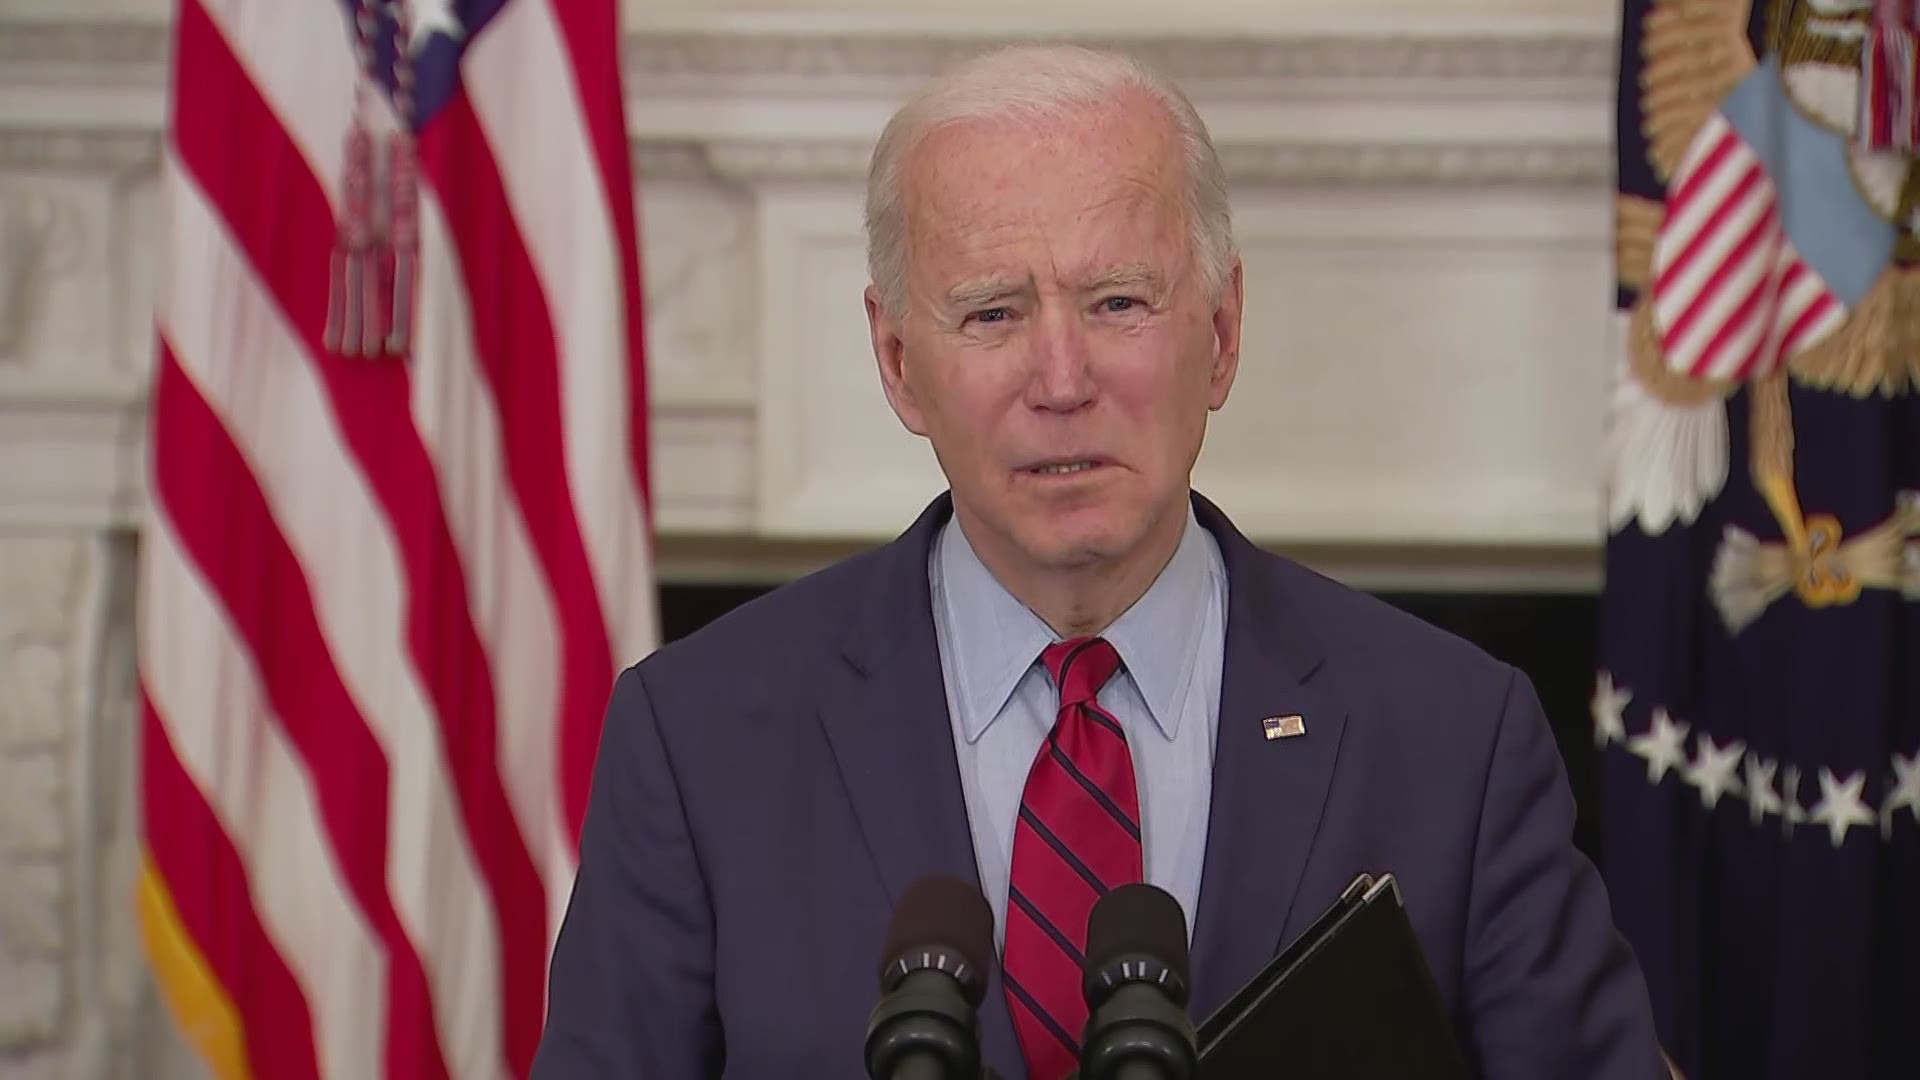 President Biden urged the House and Senate to ban assault weapons and high capacity magazines in a call for tougher gun control measures after Boulder mass shooting.